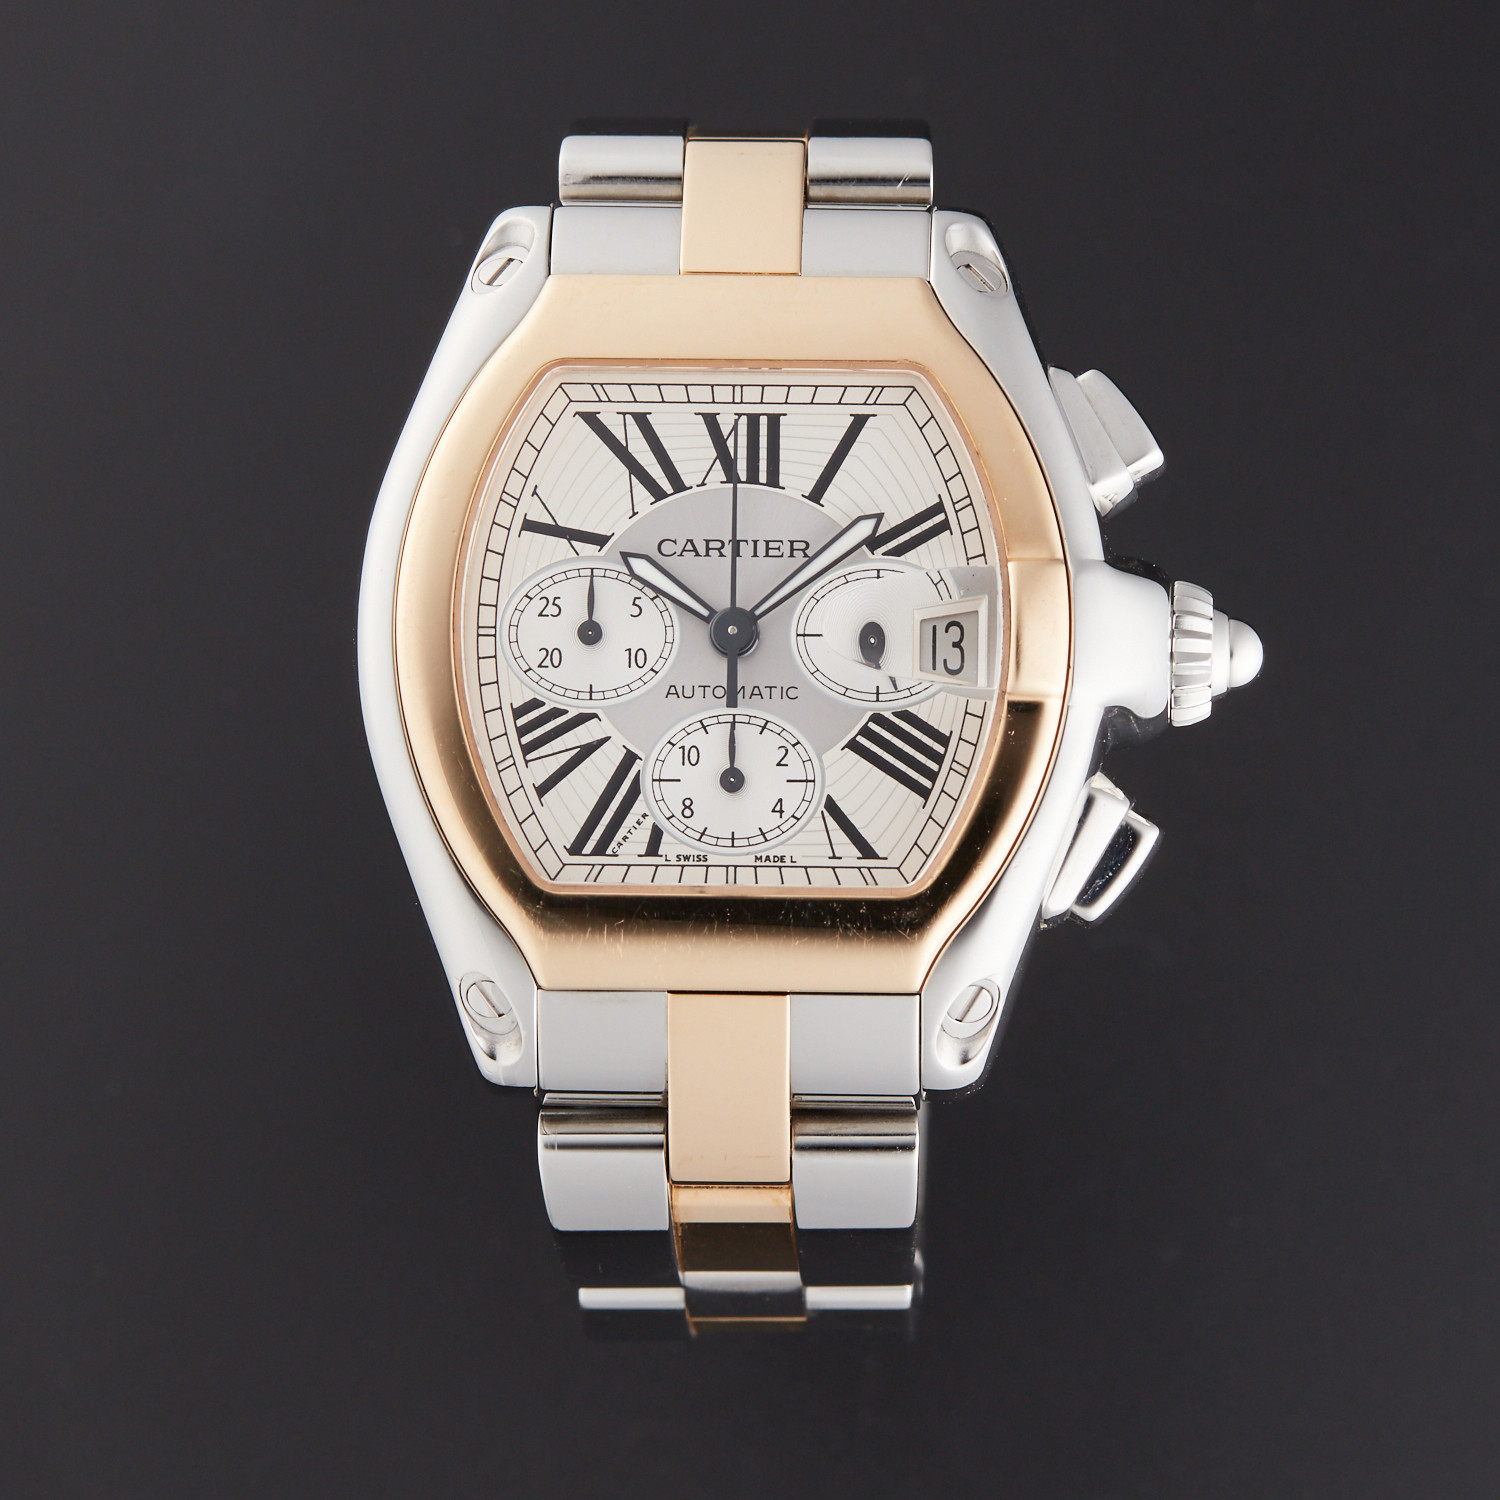 Cartier Roadster Chronograph Automatic // 2618 // Store Display The